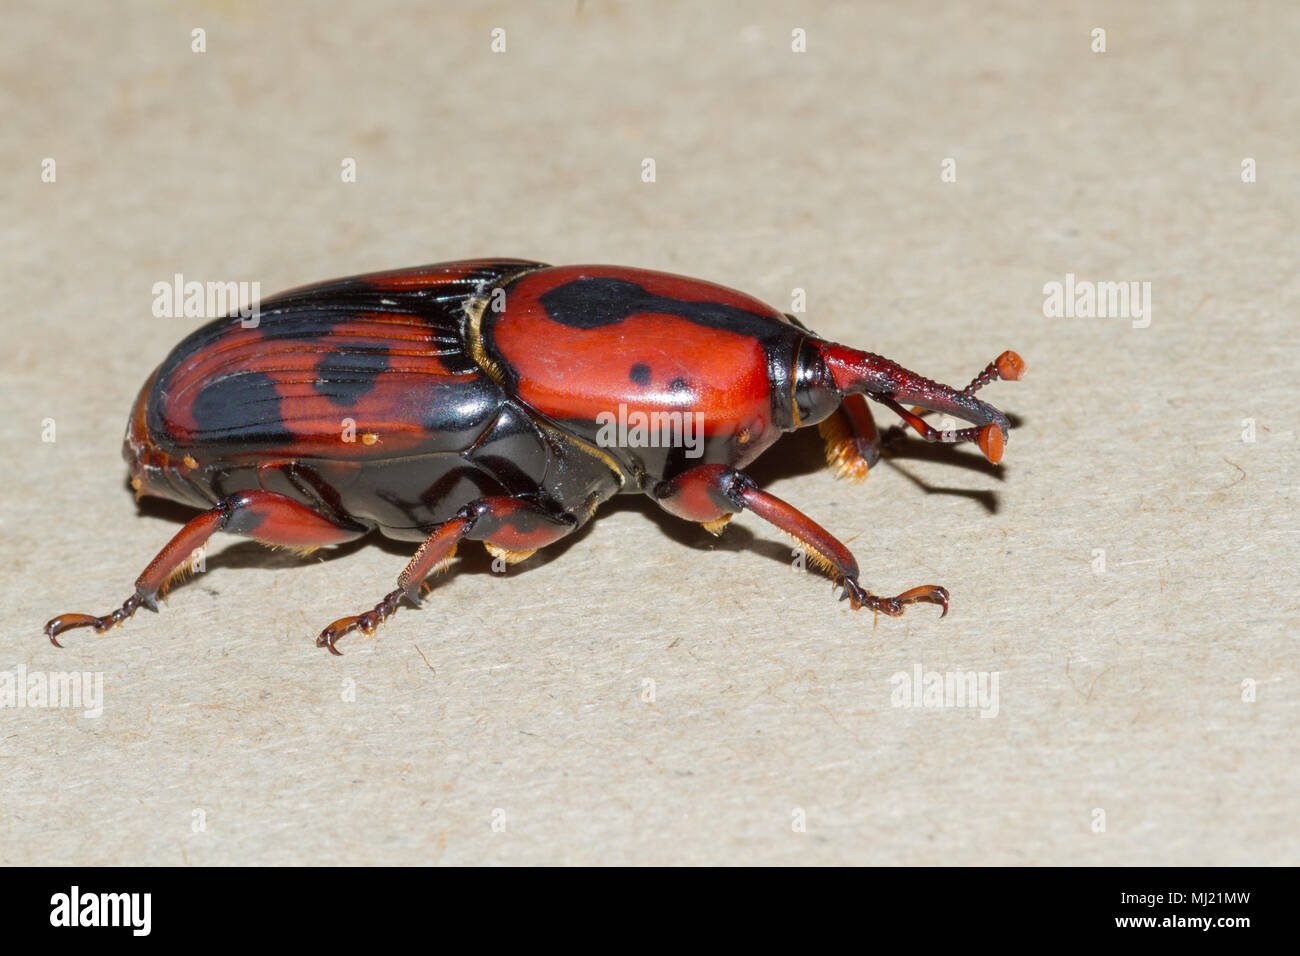 An adult palmetto weevil. Stock Photo